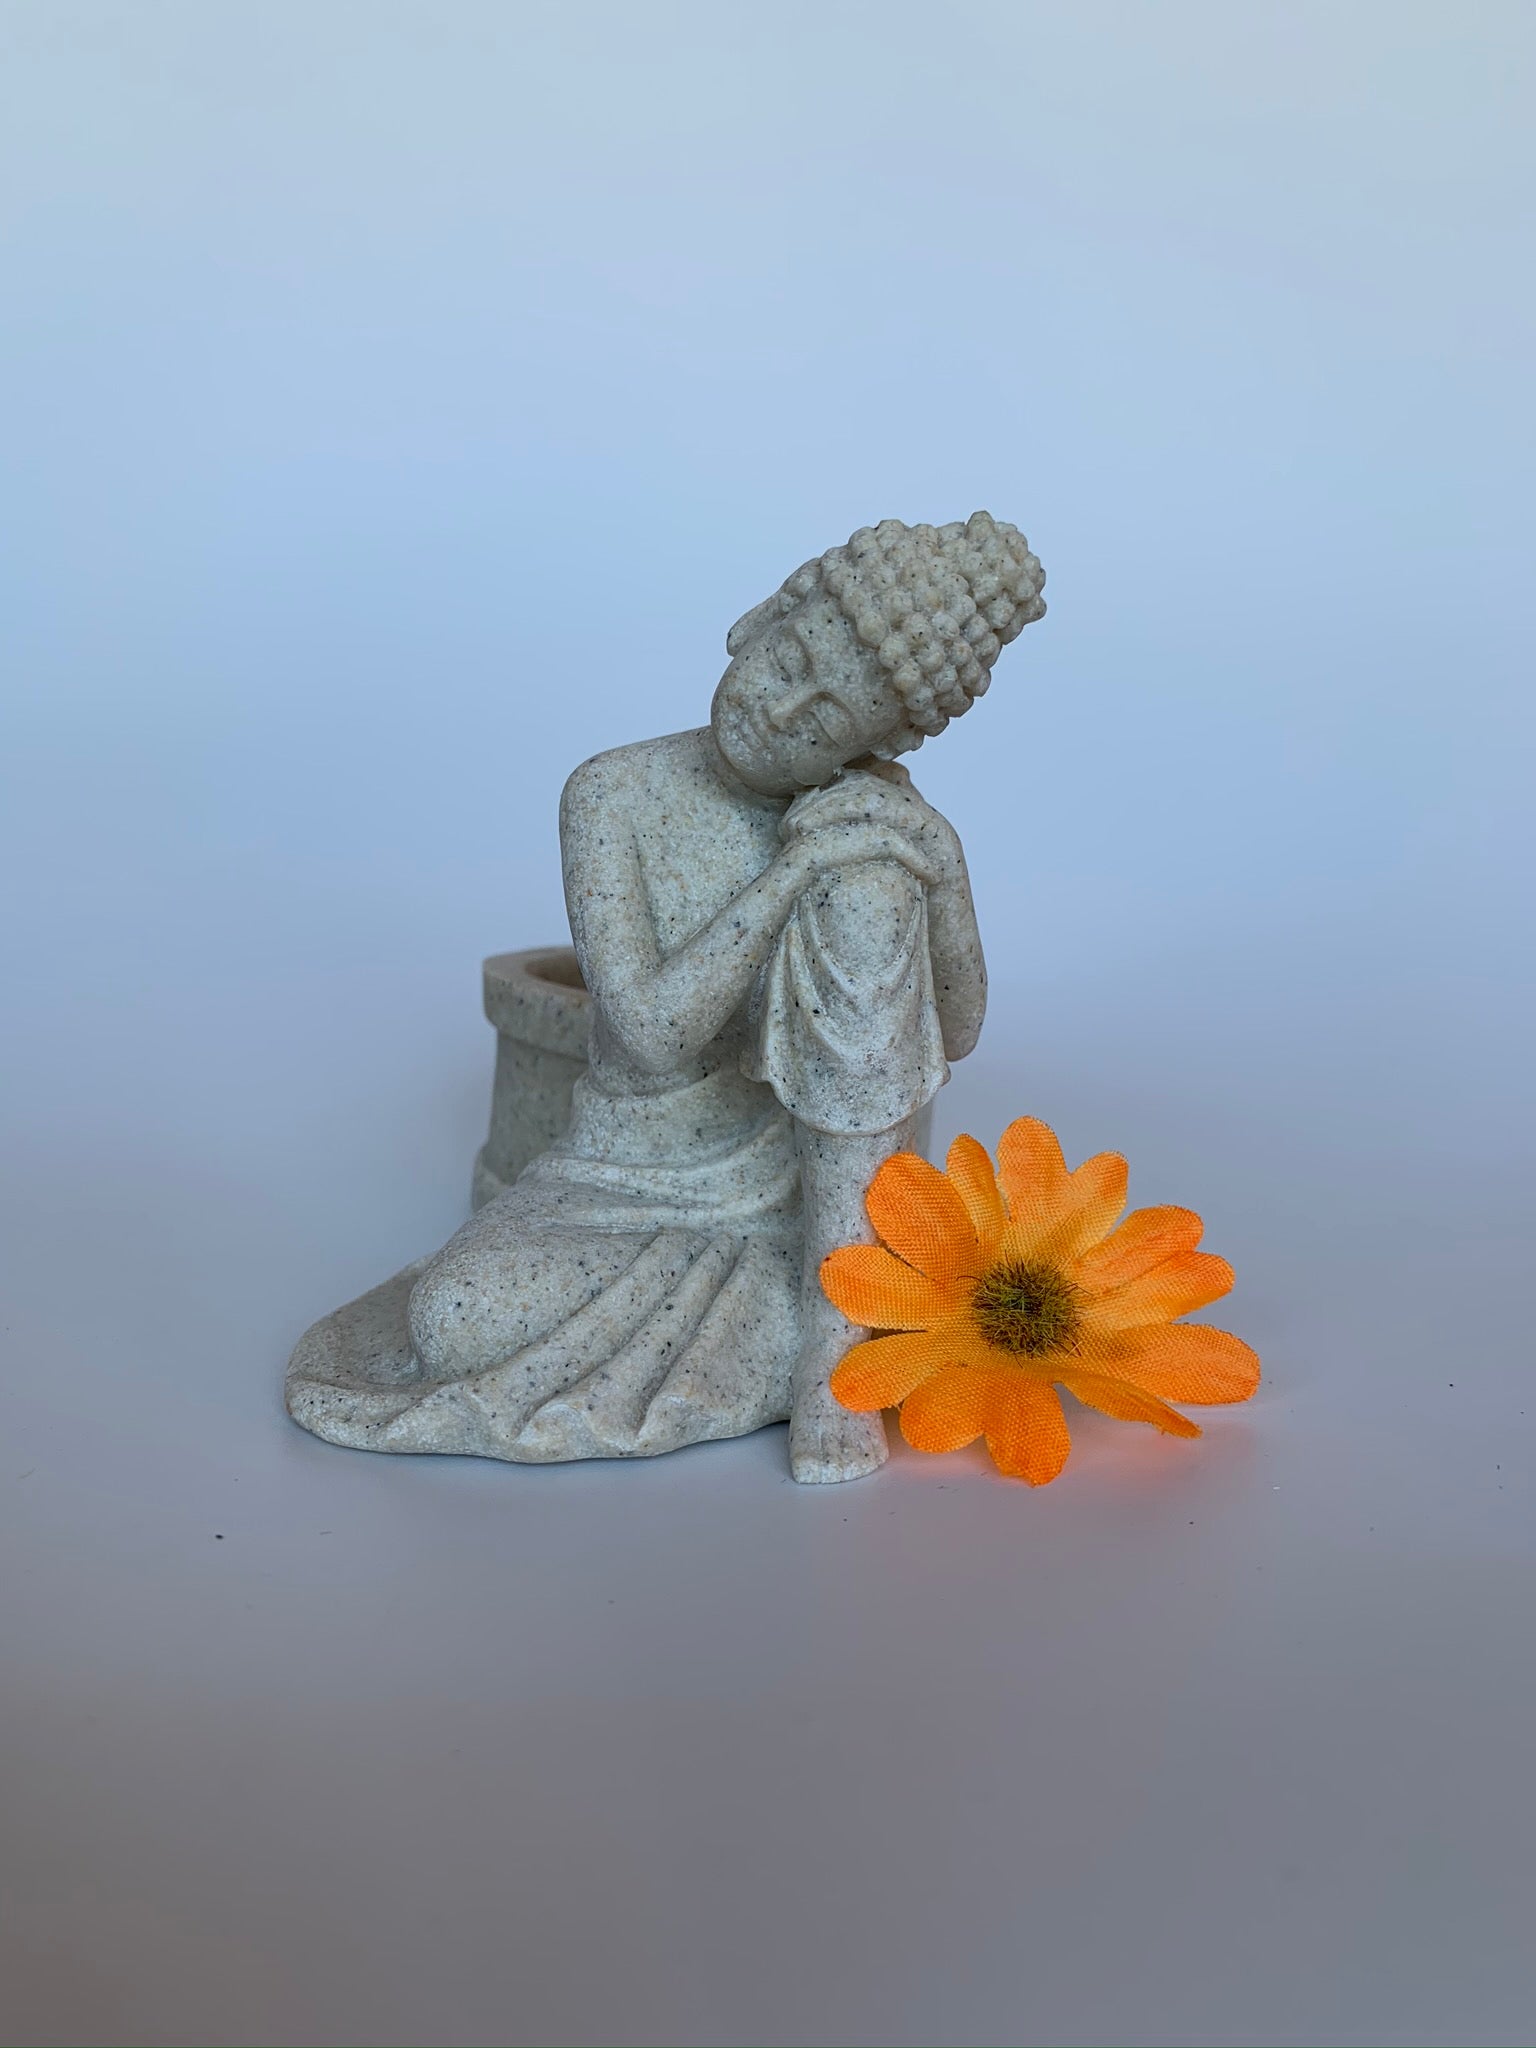 Beautiful sandstone Buddha candle holder - a welcome addition to your altar, mediation space or simply to add to the décor of your home. Add a votive candle to increase the ambiance or to use as a focus during spiritual practice. Buddha is revered around the world and his teachings and actions have shown us the beauty, wonder and power of enlightenment. The term Buddha refers to the Awakened One. Size is approximately 3¼" tall.